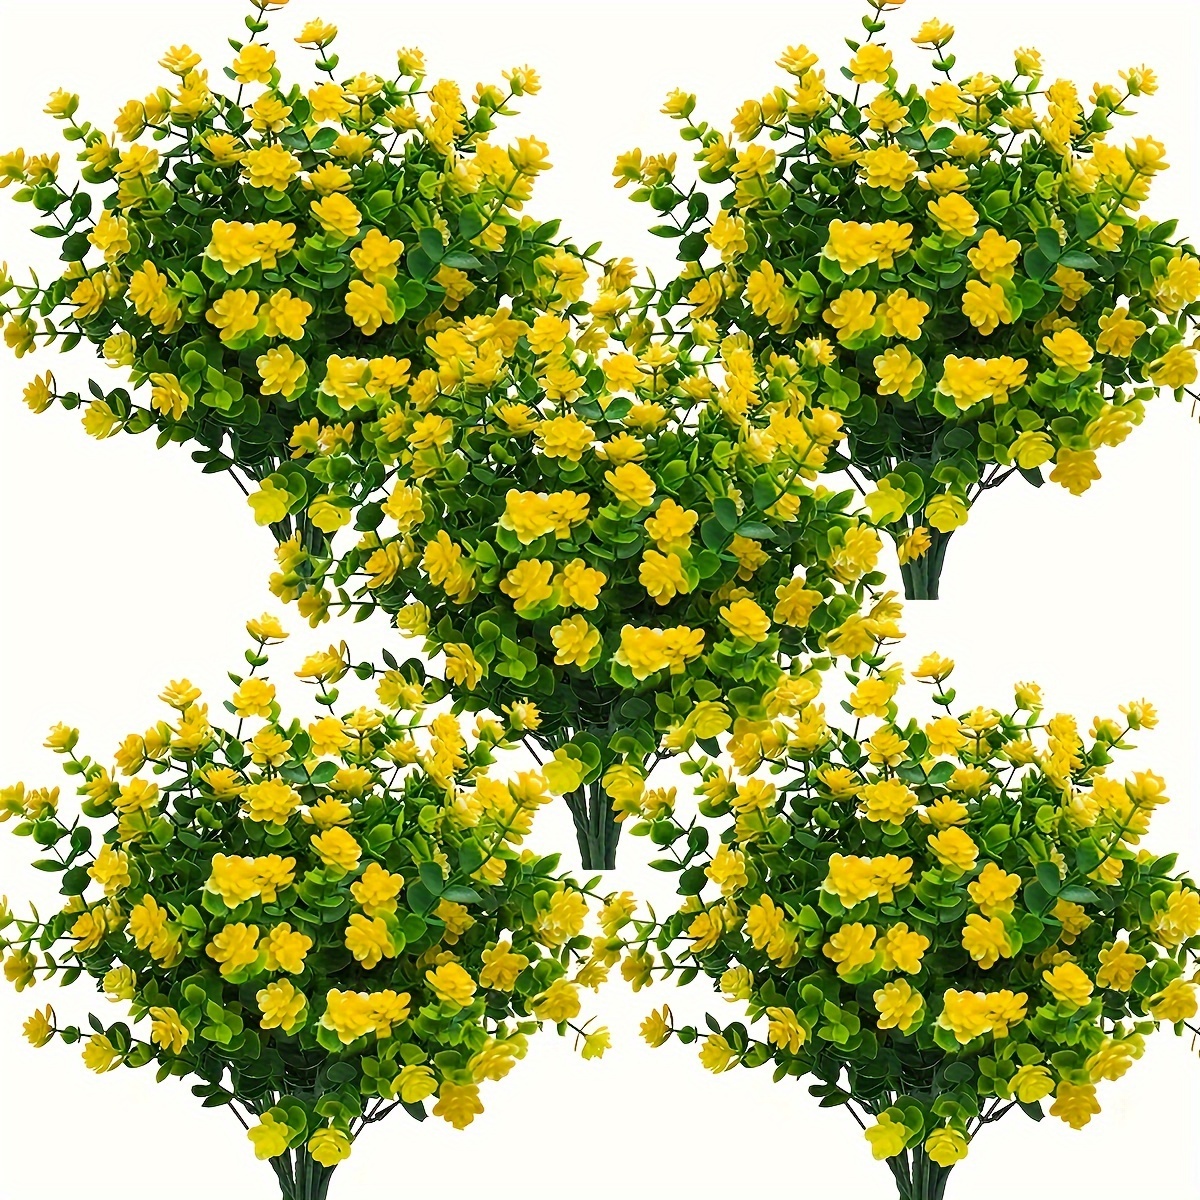 

8 Bundles Artificial Flowers, Fake Outdoor Uv Resistant Plants Faux Plastic Greenery Shrubs Indoor Outside Hanging Planter Home Kitchen Office Wedding Garden Decor